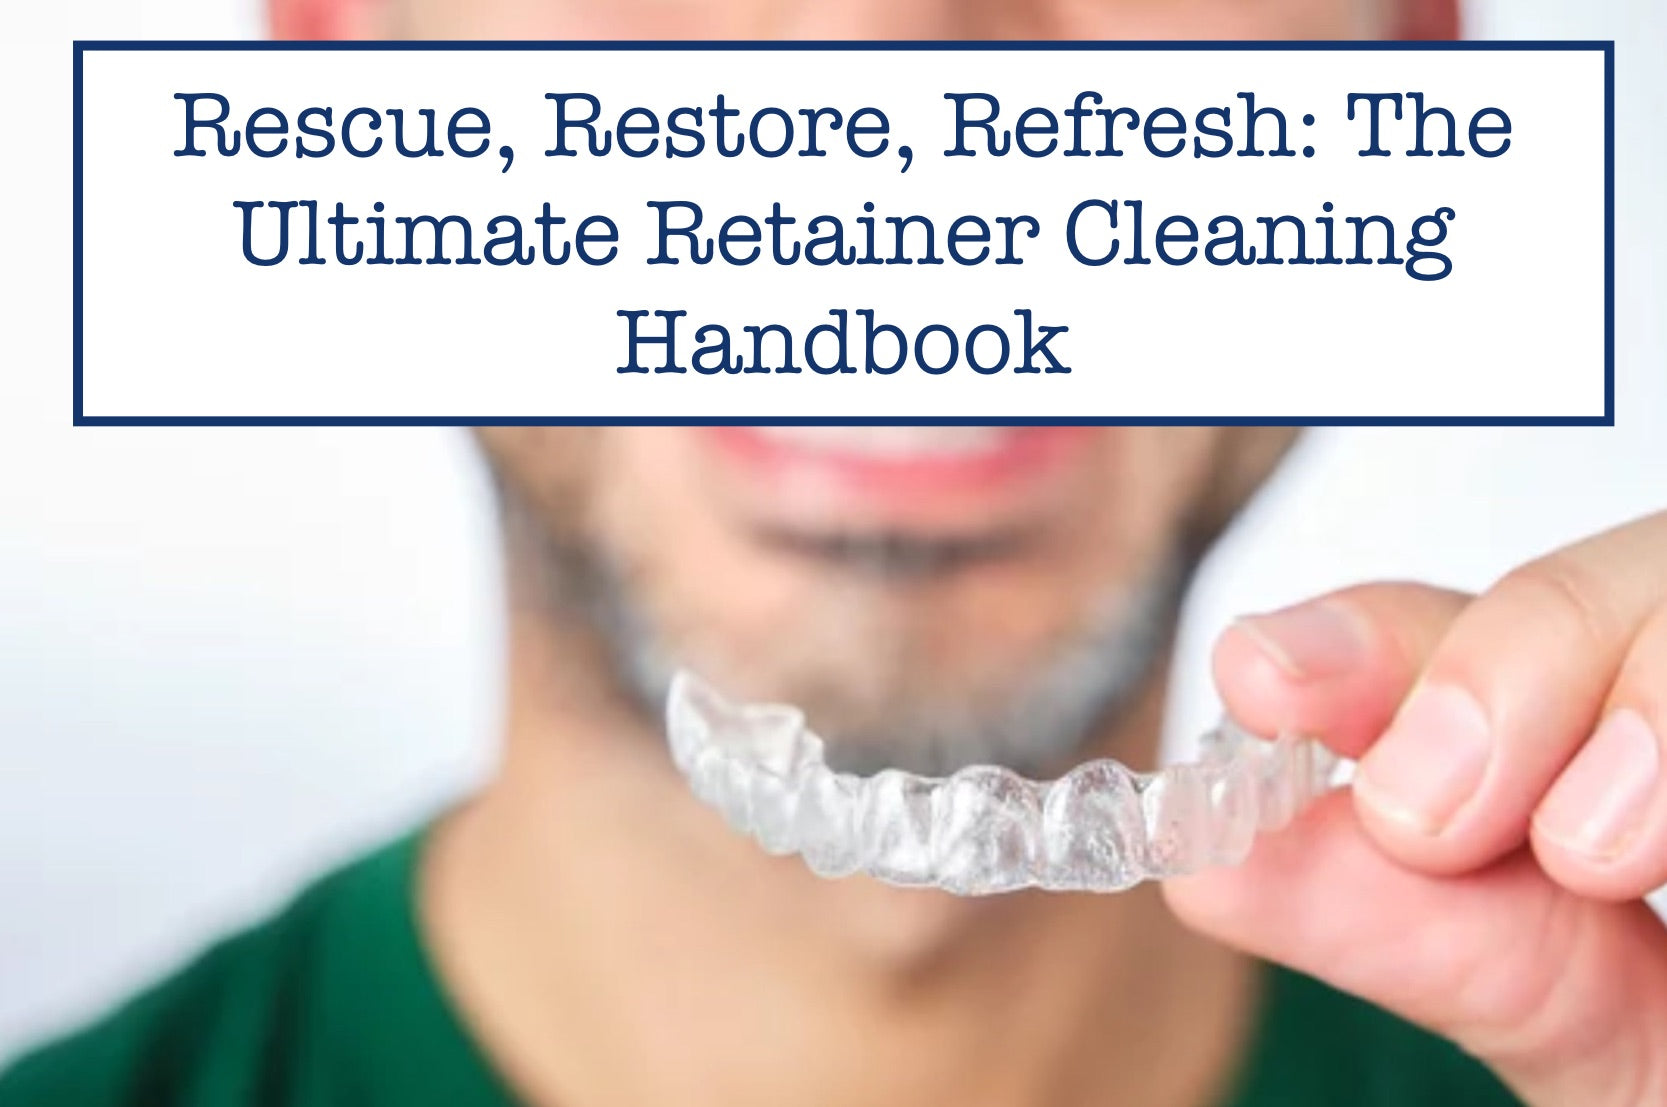 Rescue, Restore, Refresh: The Ultimate Retainer Cleaning Handbook